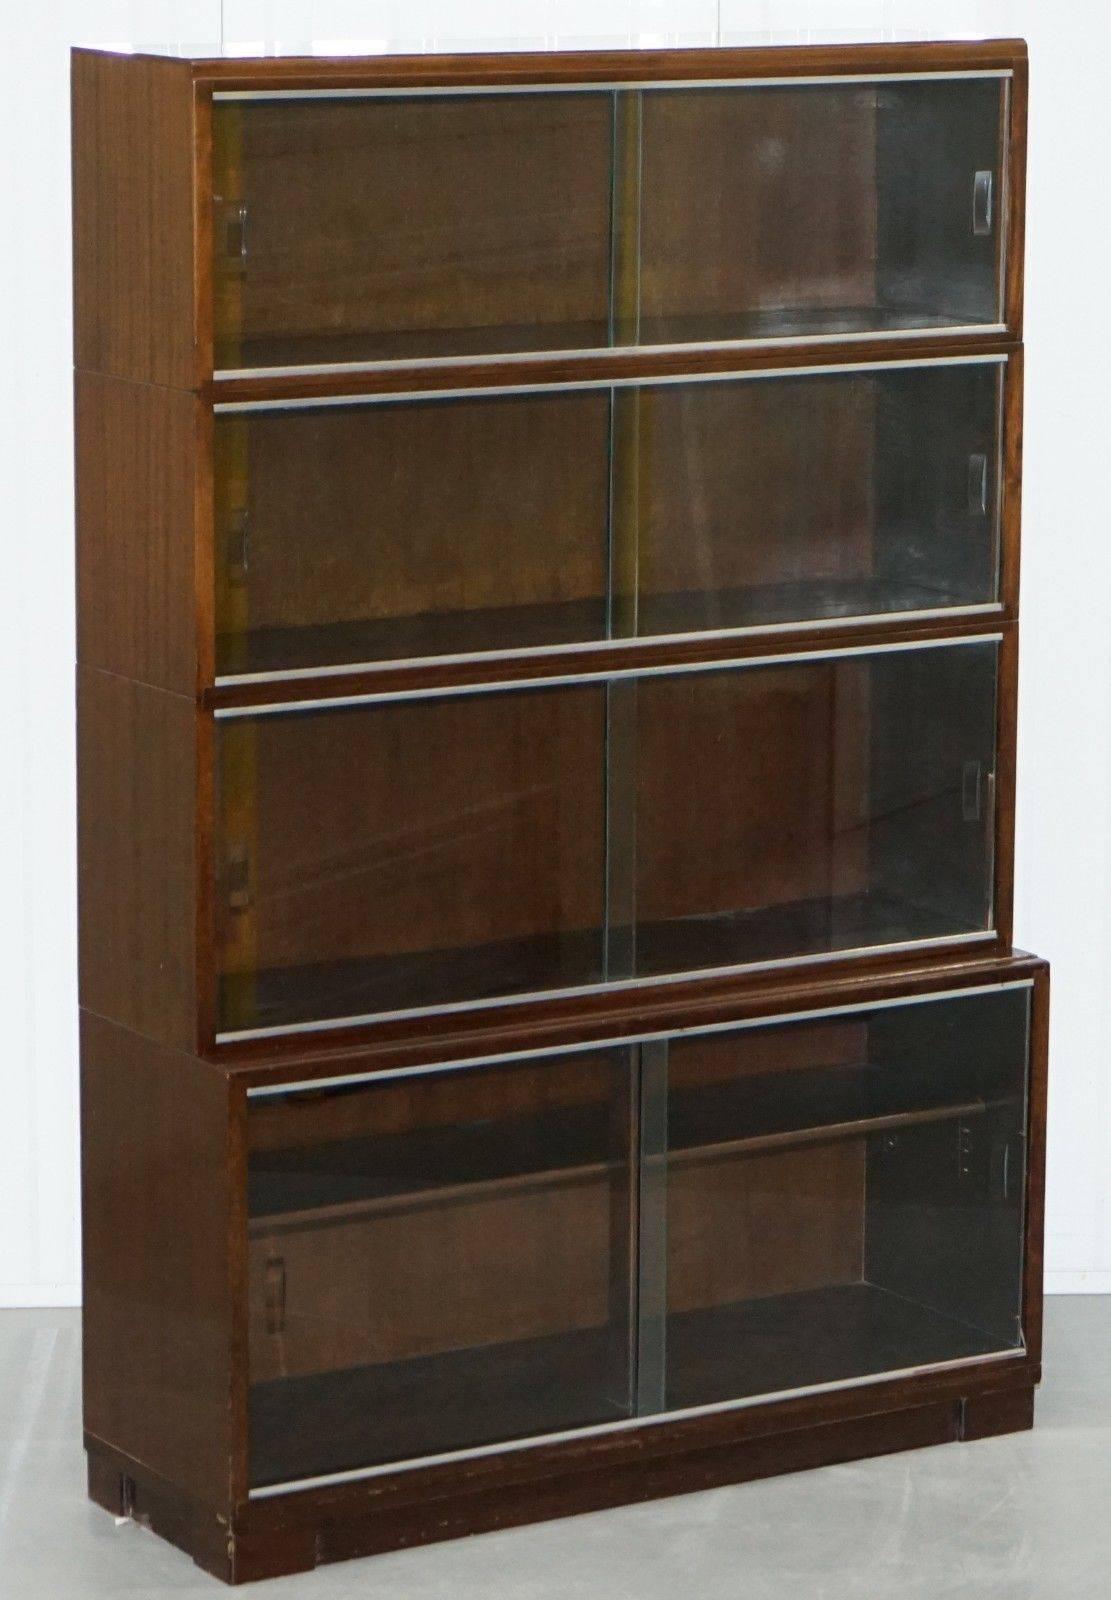 1950s Mahogany Modular Minty Oxford Vintage Stacking Legal Bookcase Glass Doors 2